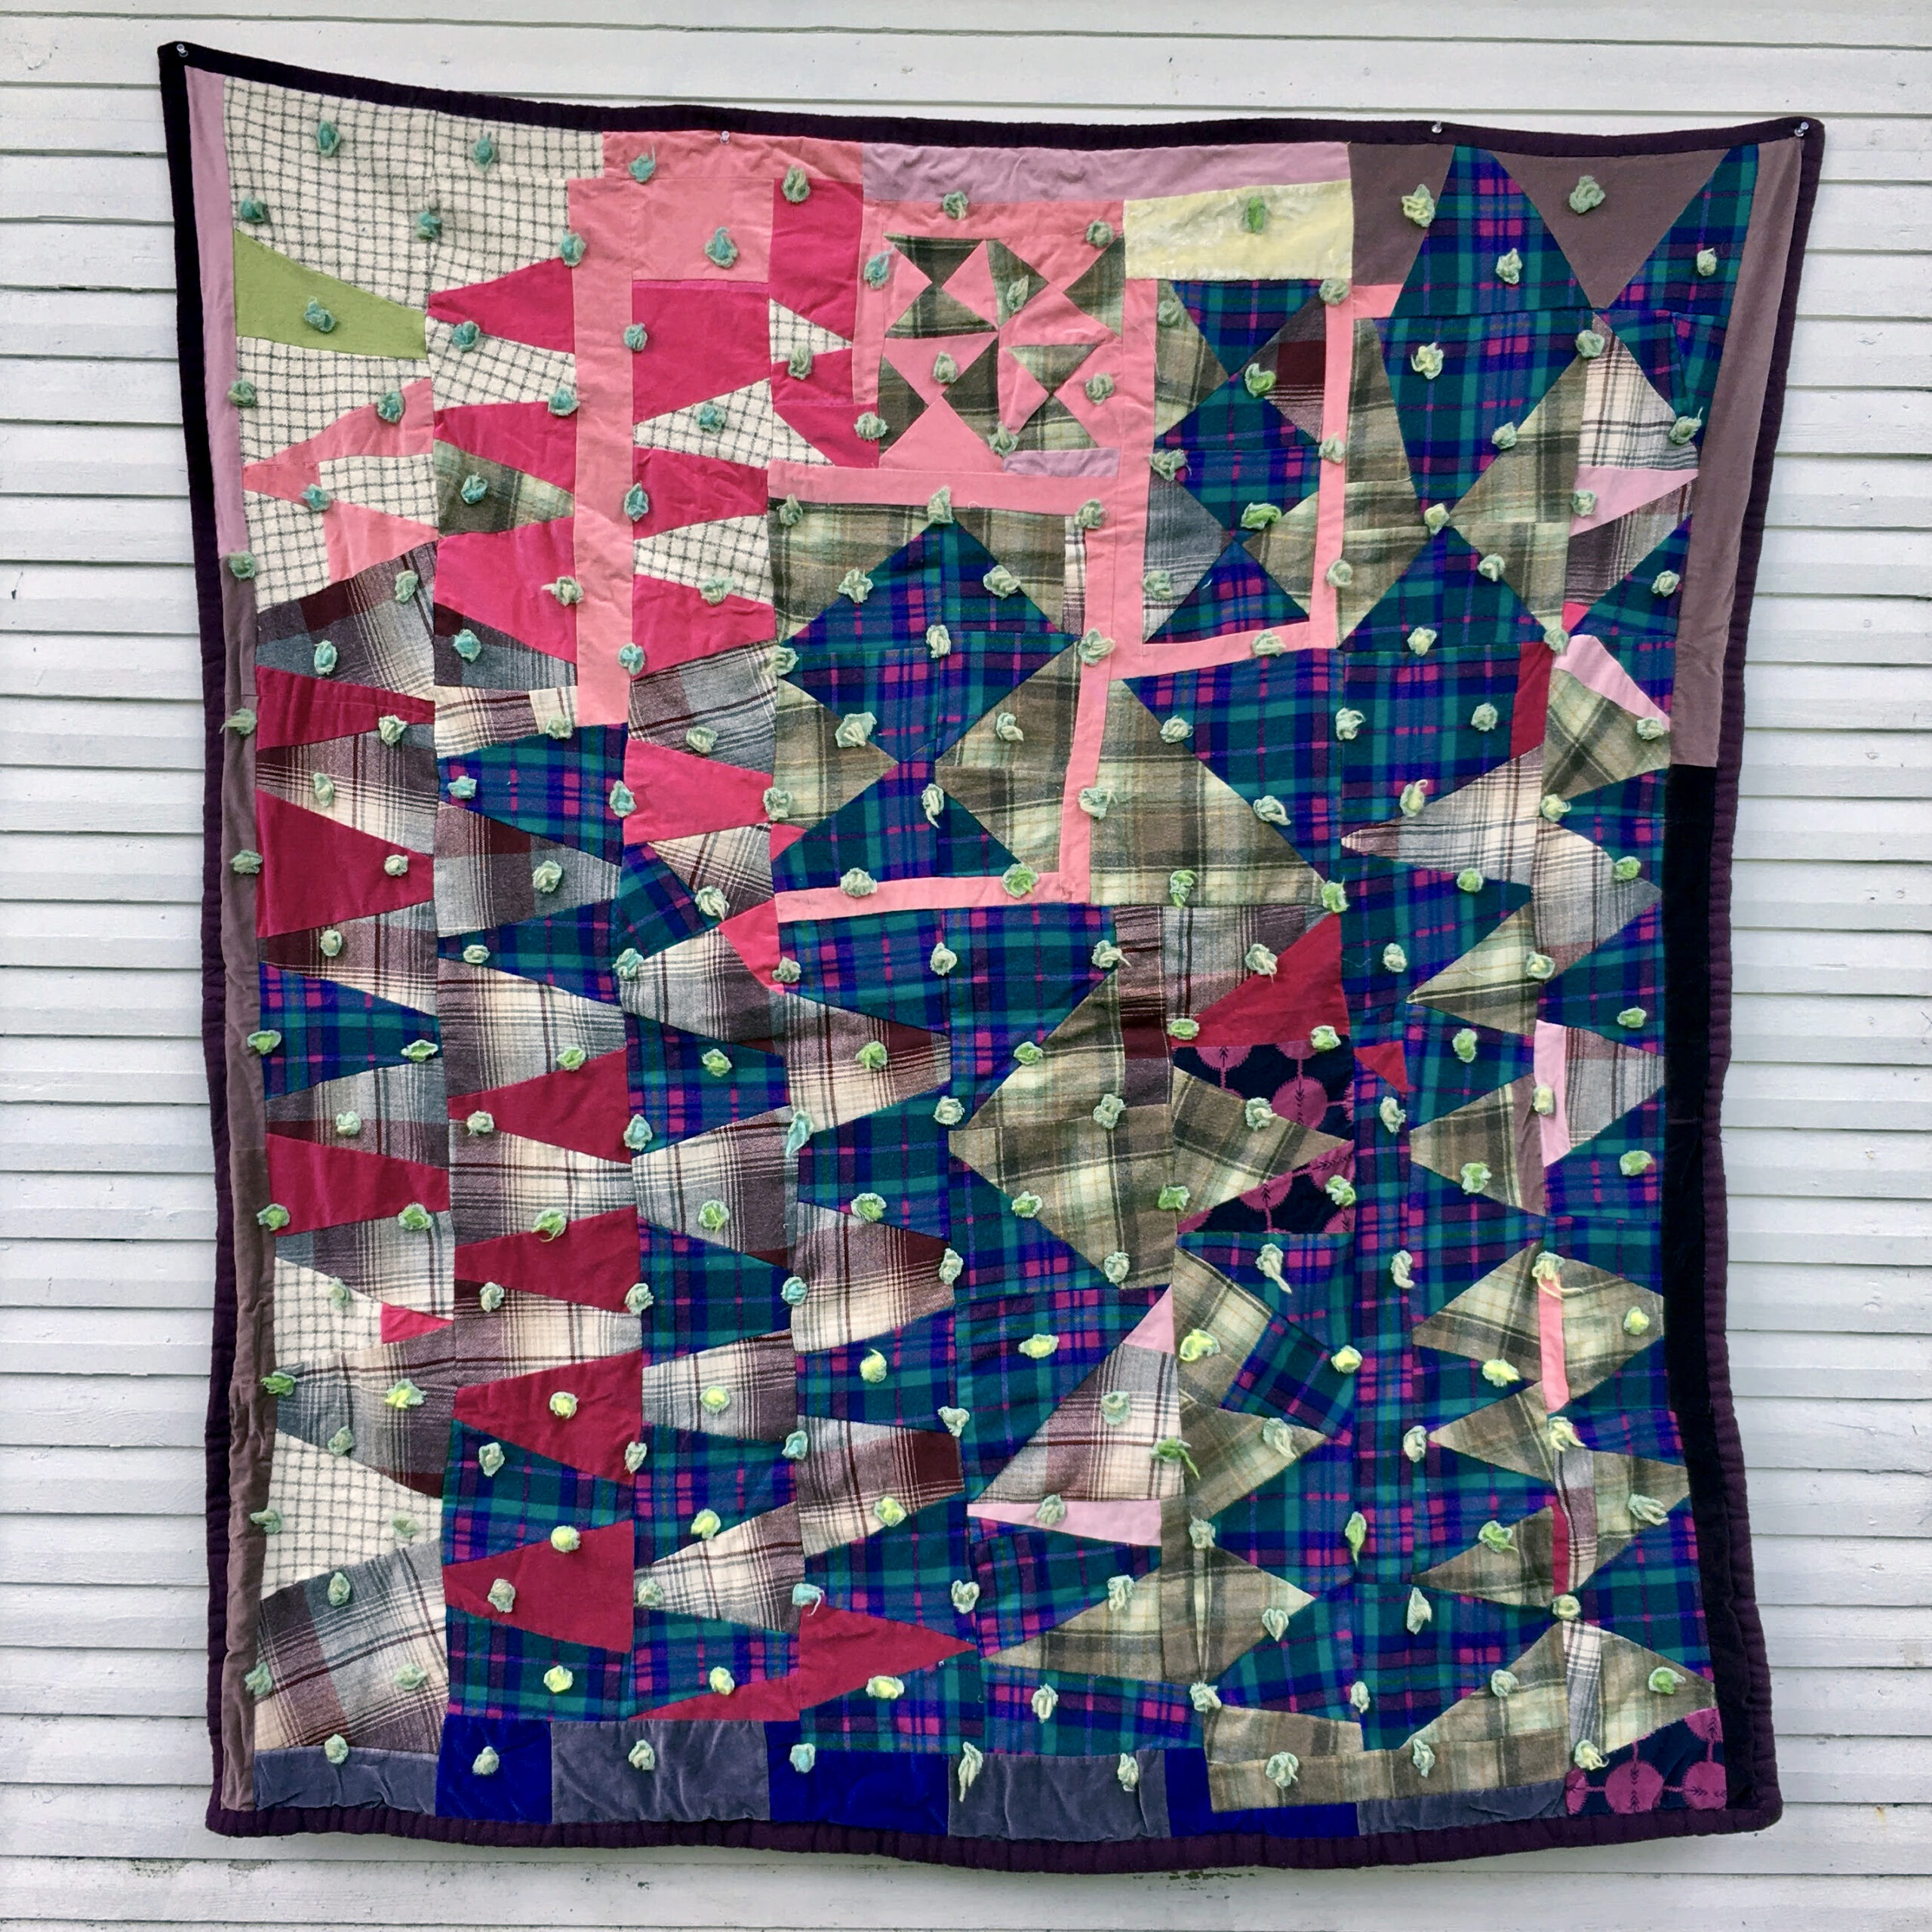 A quilt made of vertical rows of small triangles pieced together, some are pink, some are blue, some are white, some are plaids comprised of neutral colors.